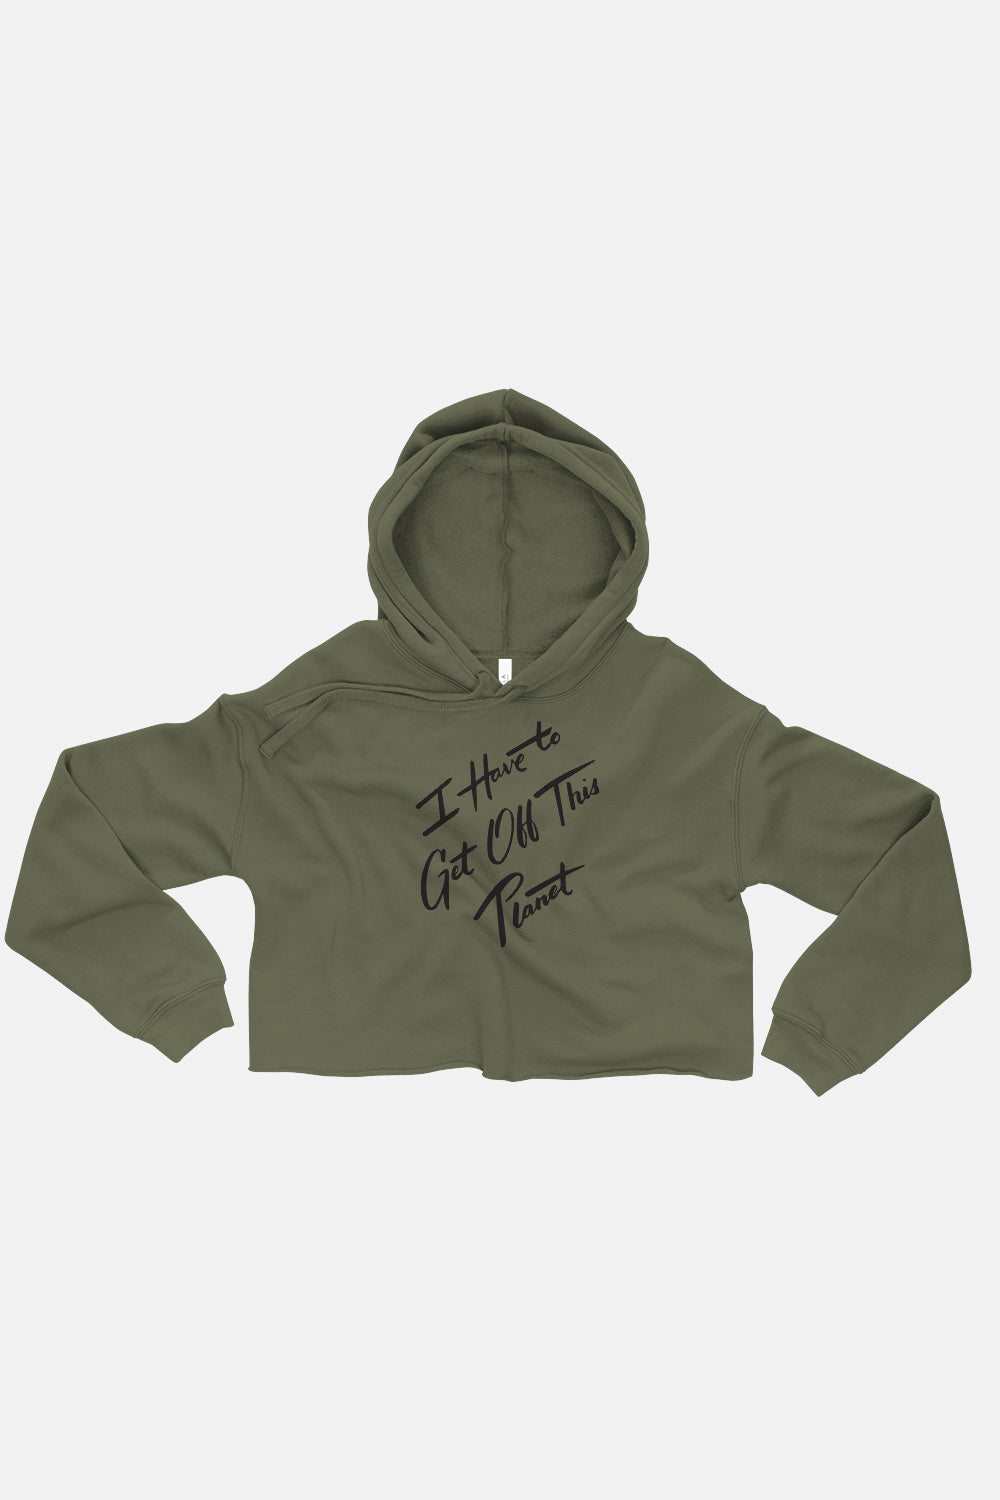 I Have to Get Off This Planet Fitted Crop Hoodie